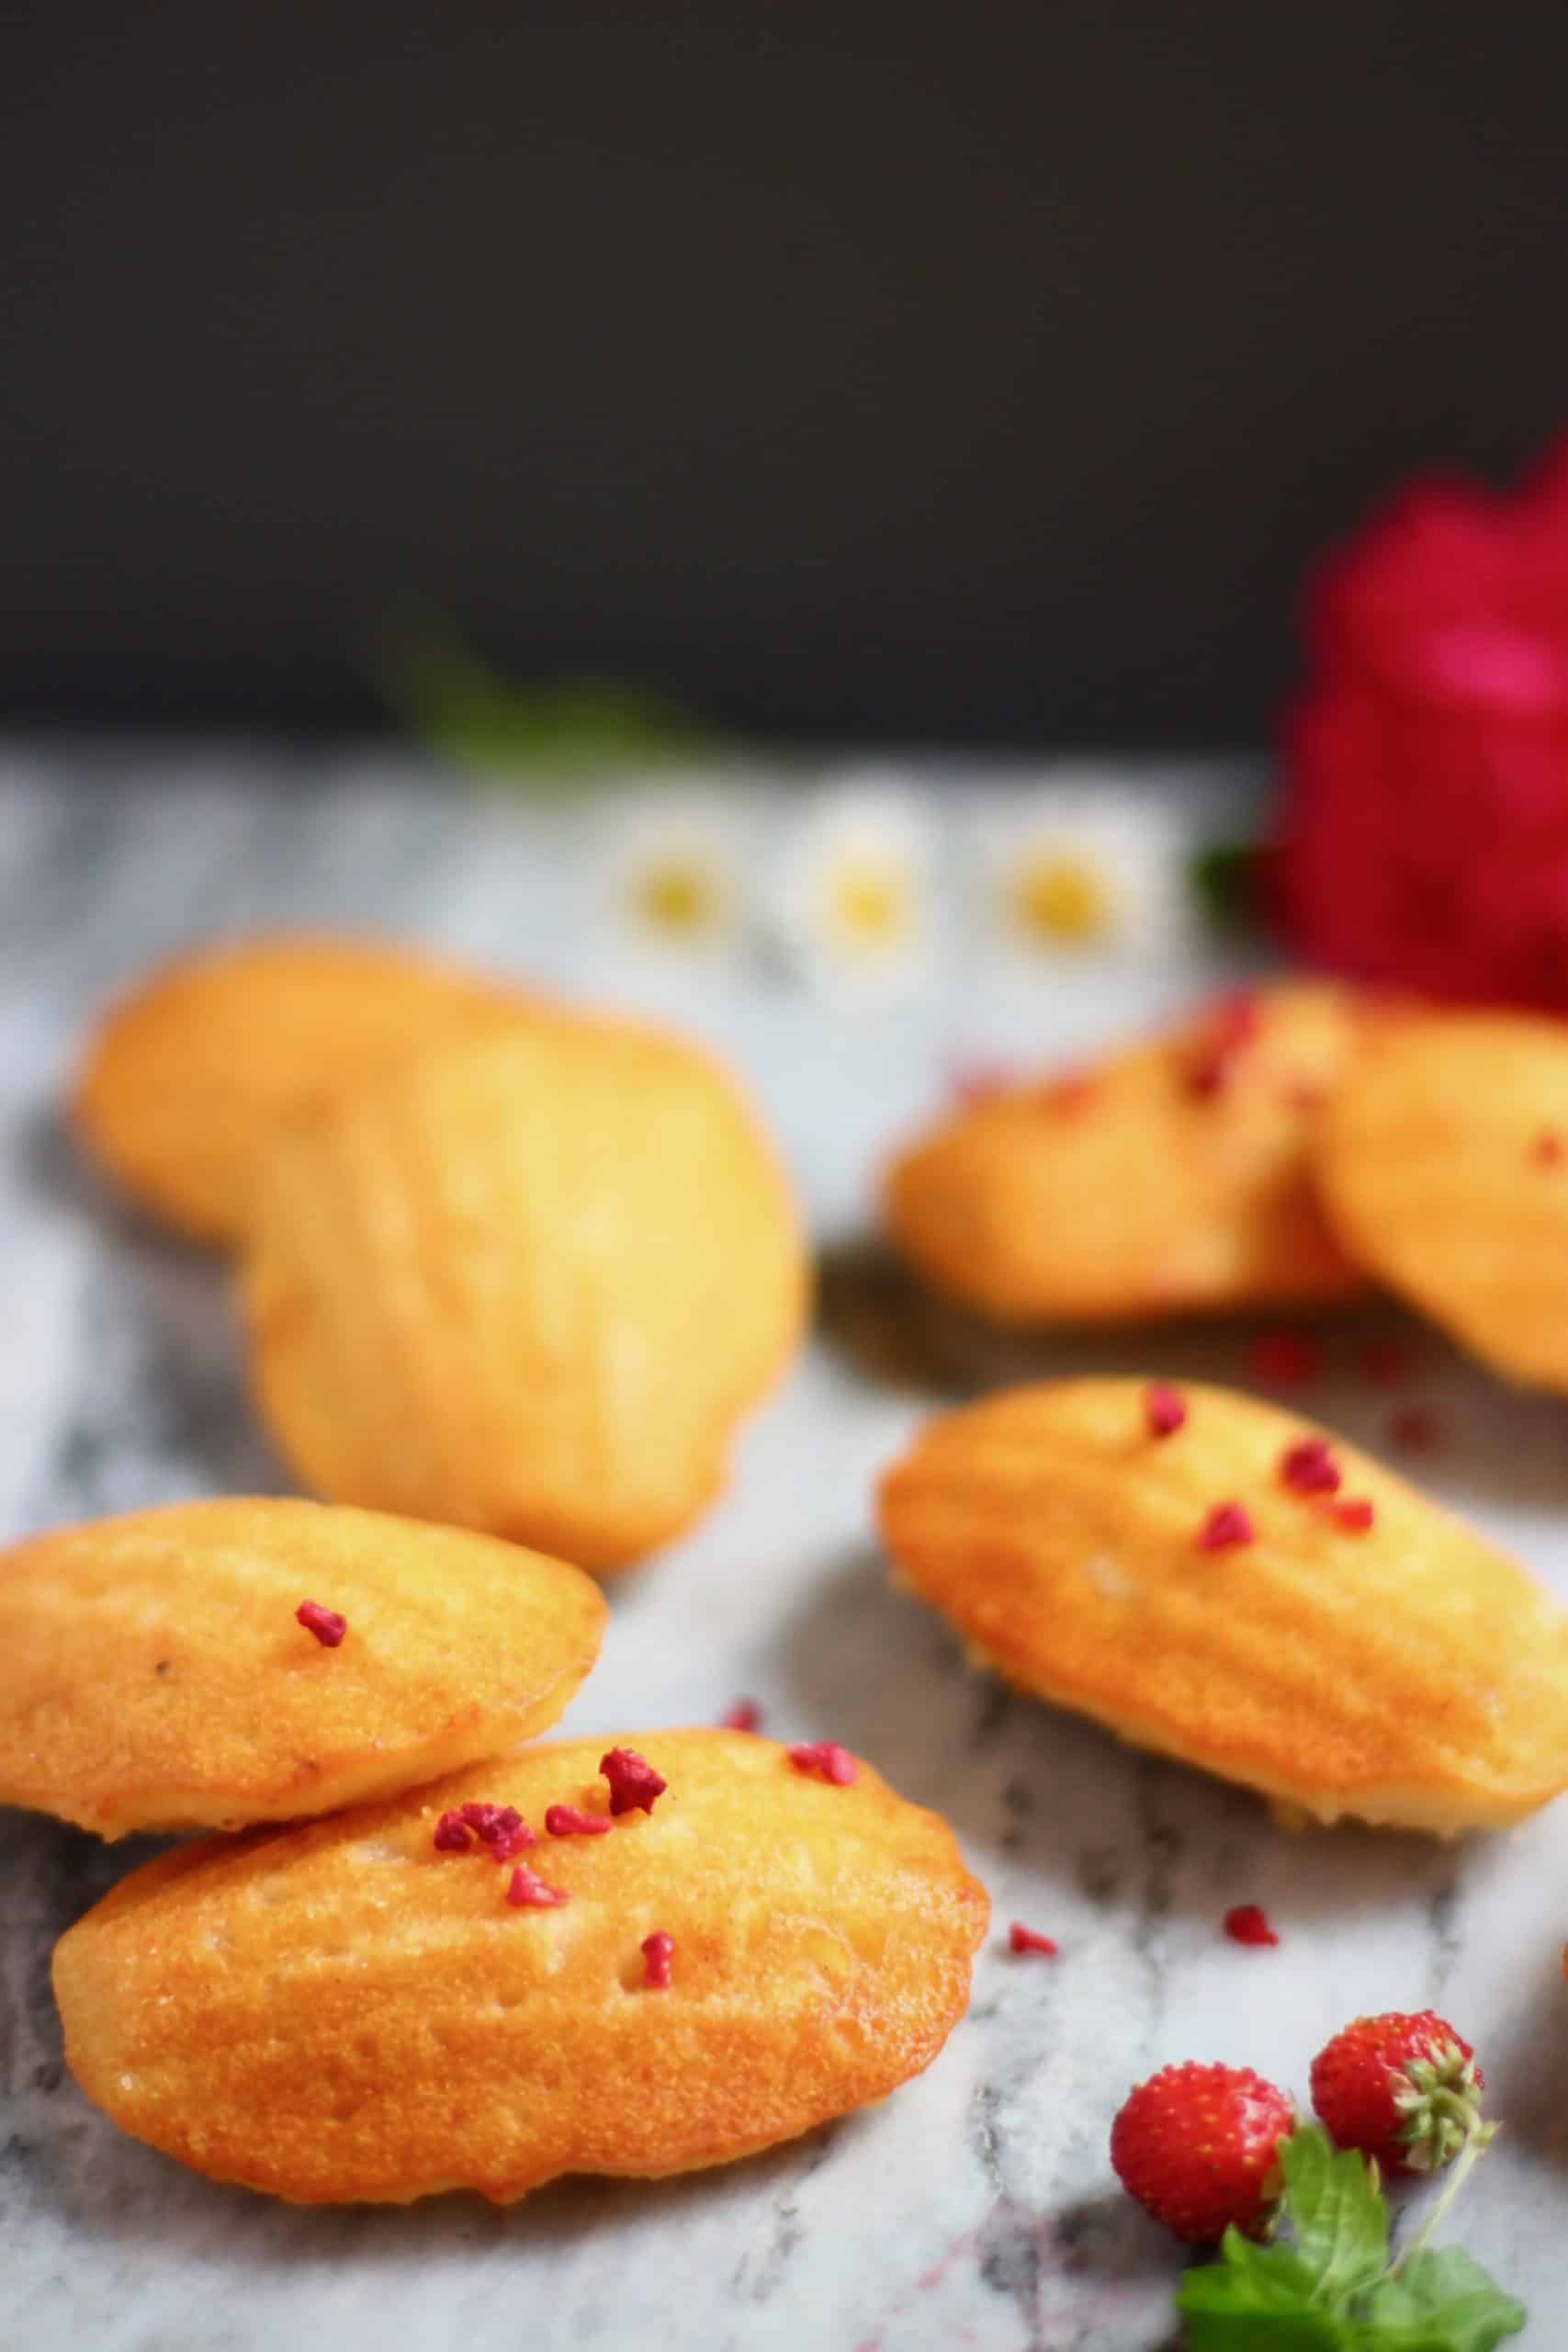 Seven madeleines on a marble background decorated with flowers